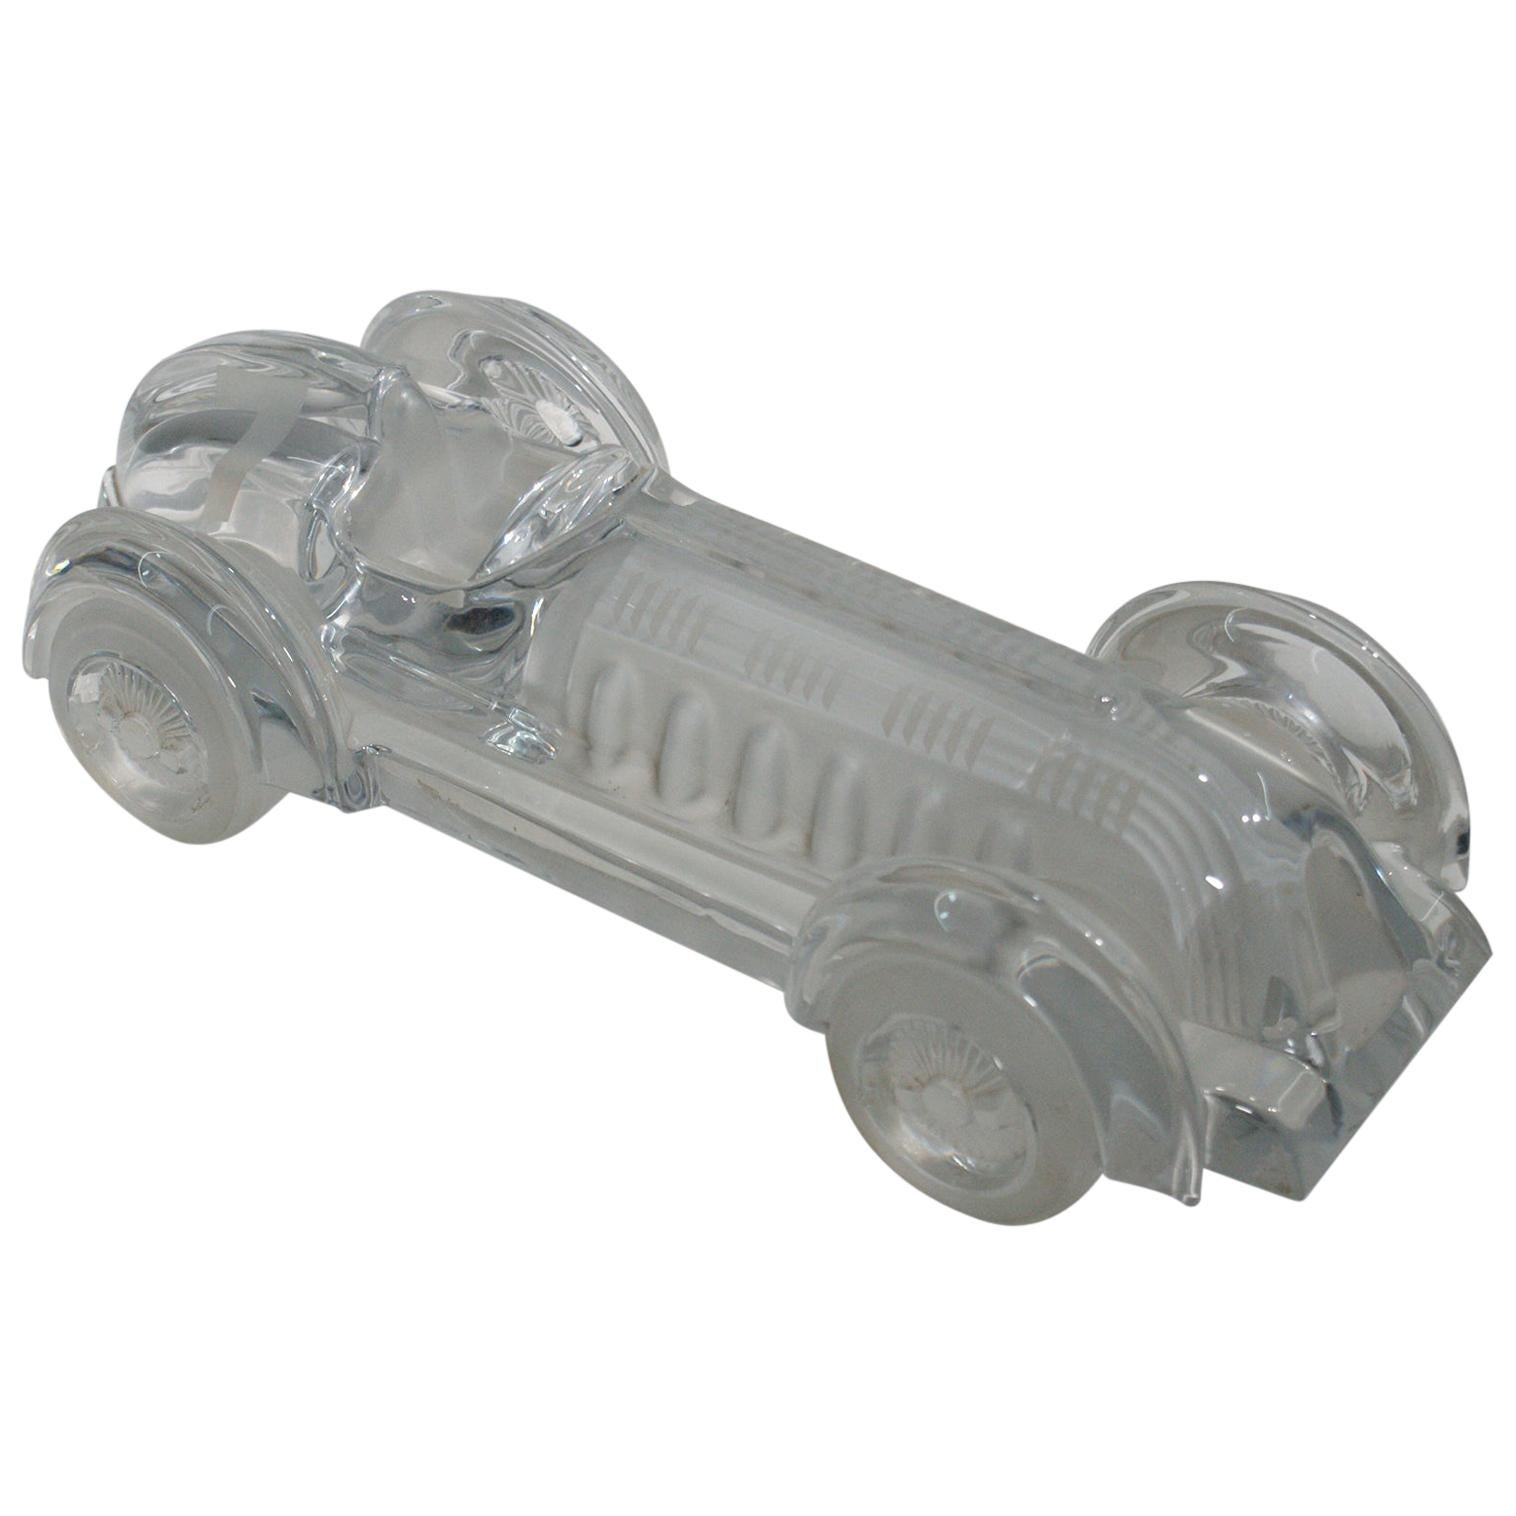 Signed Daum France, Crystal Sculpture of Vintage Race Car in Limited Edition